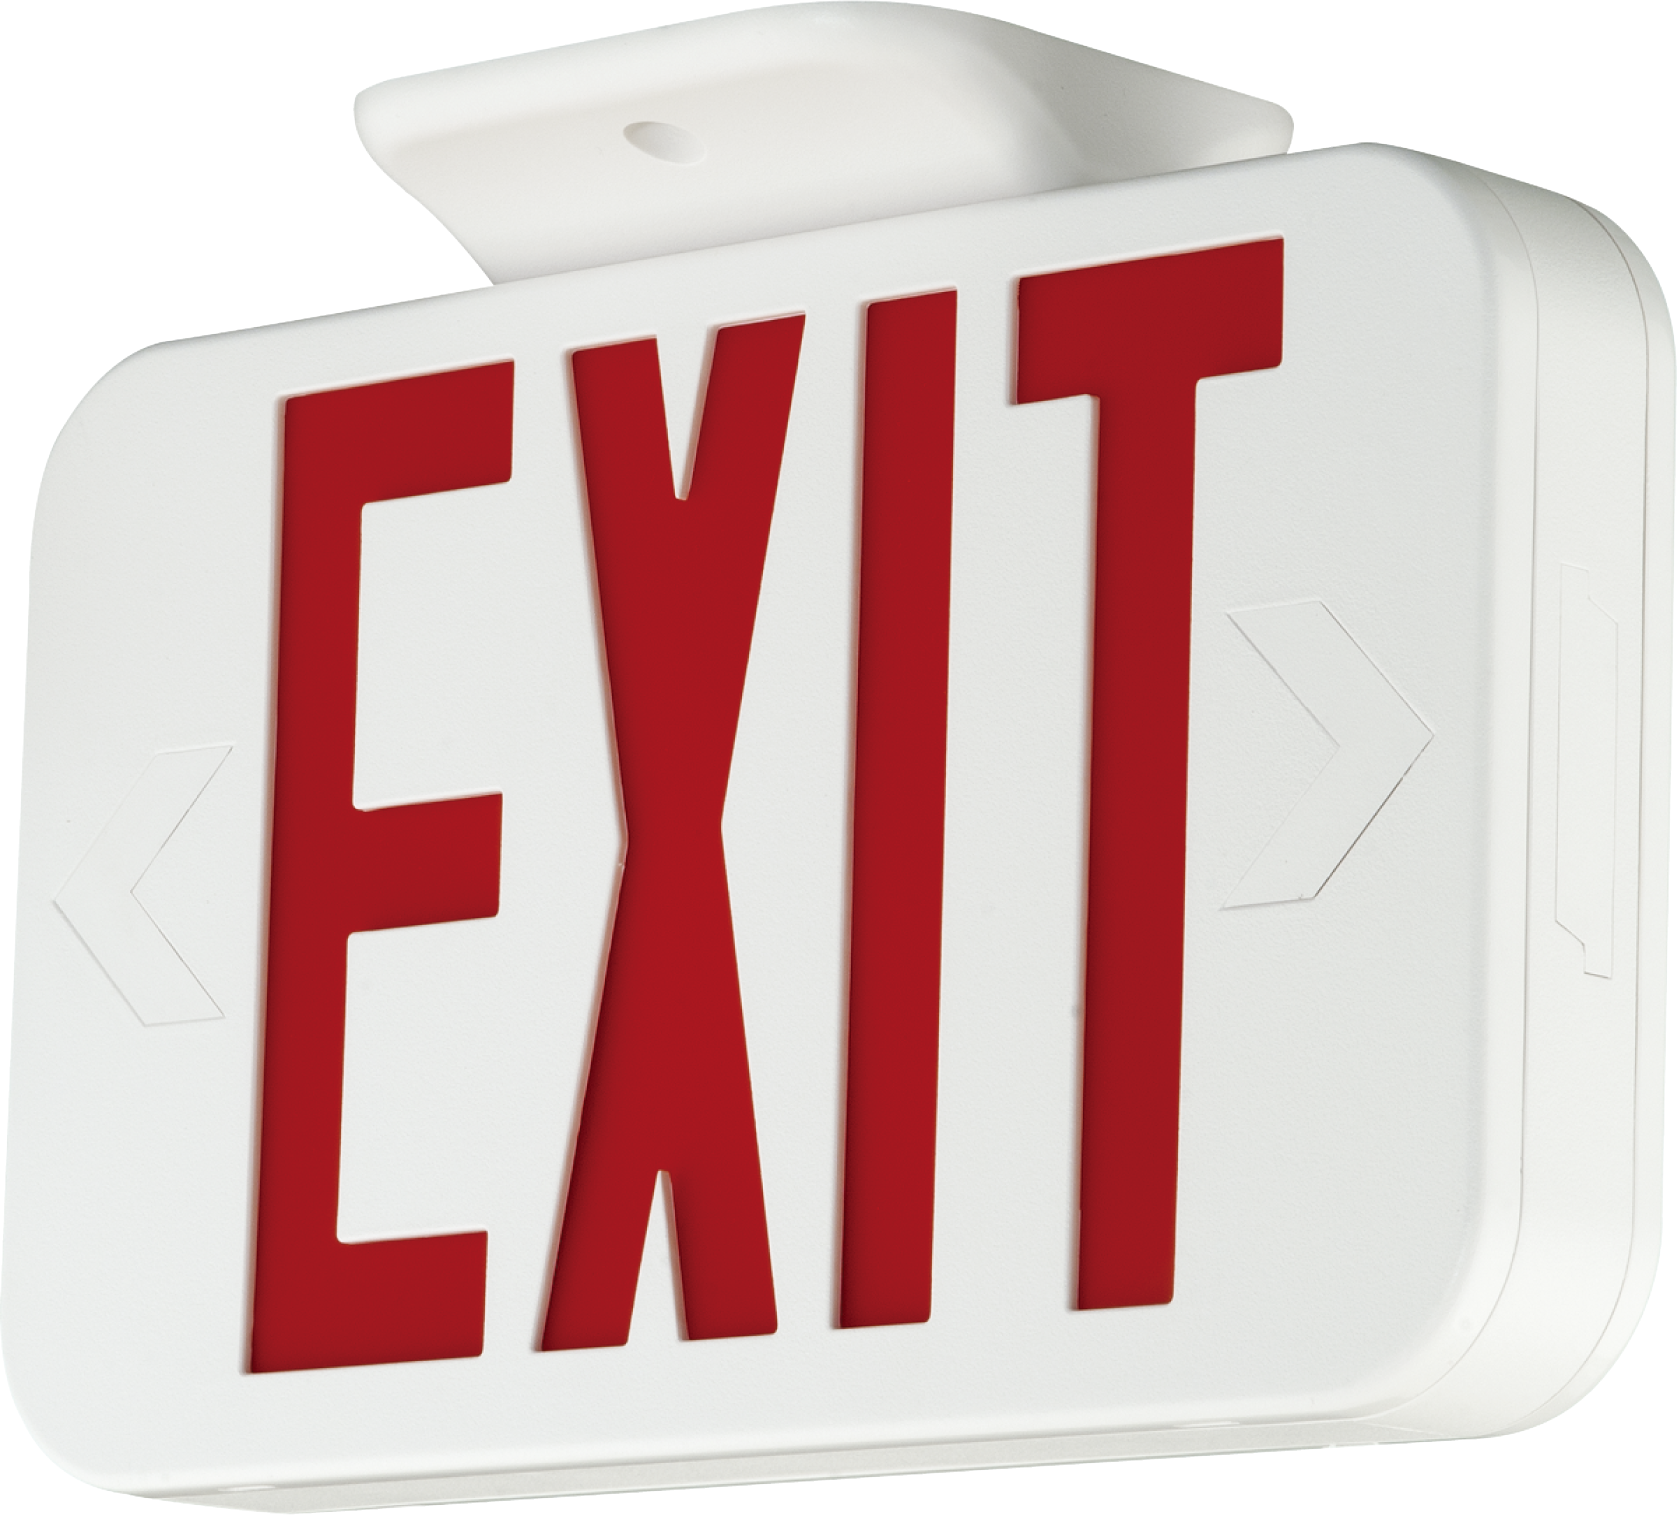 PAC0433 Thermoplastic Micro LED Exit Signs